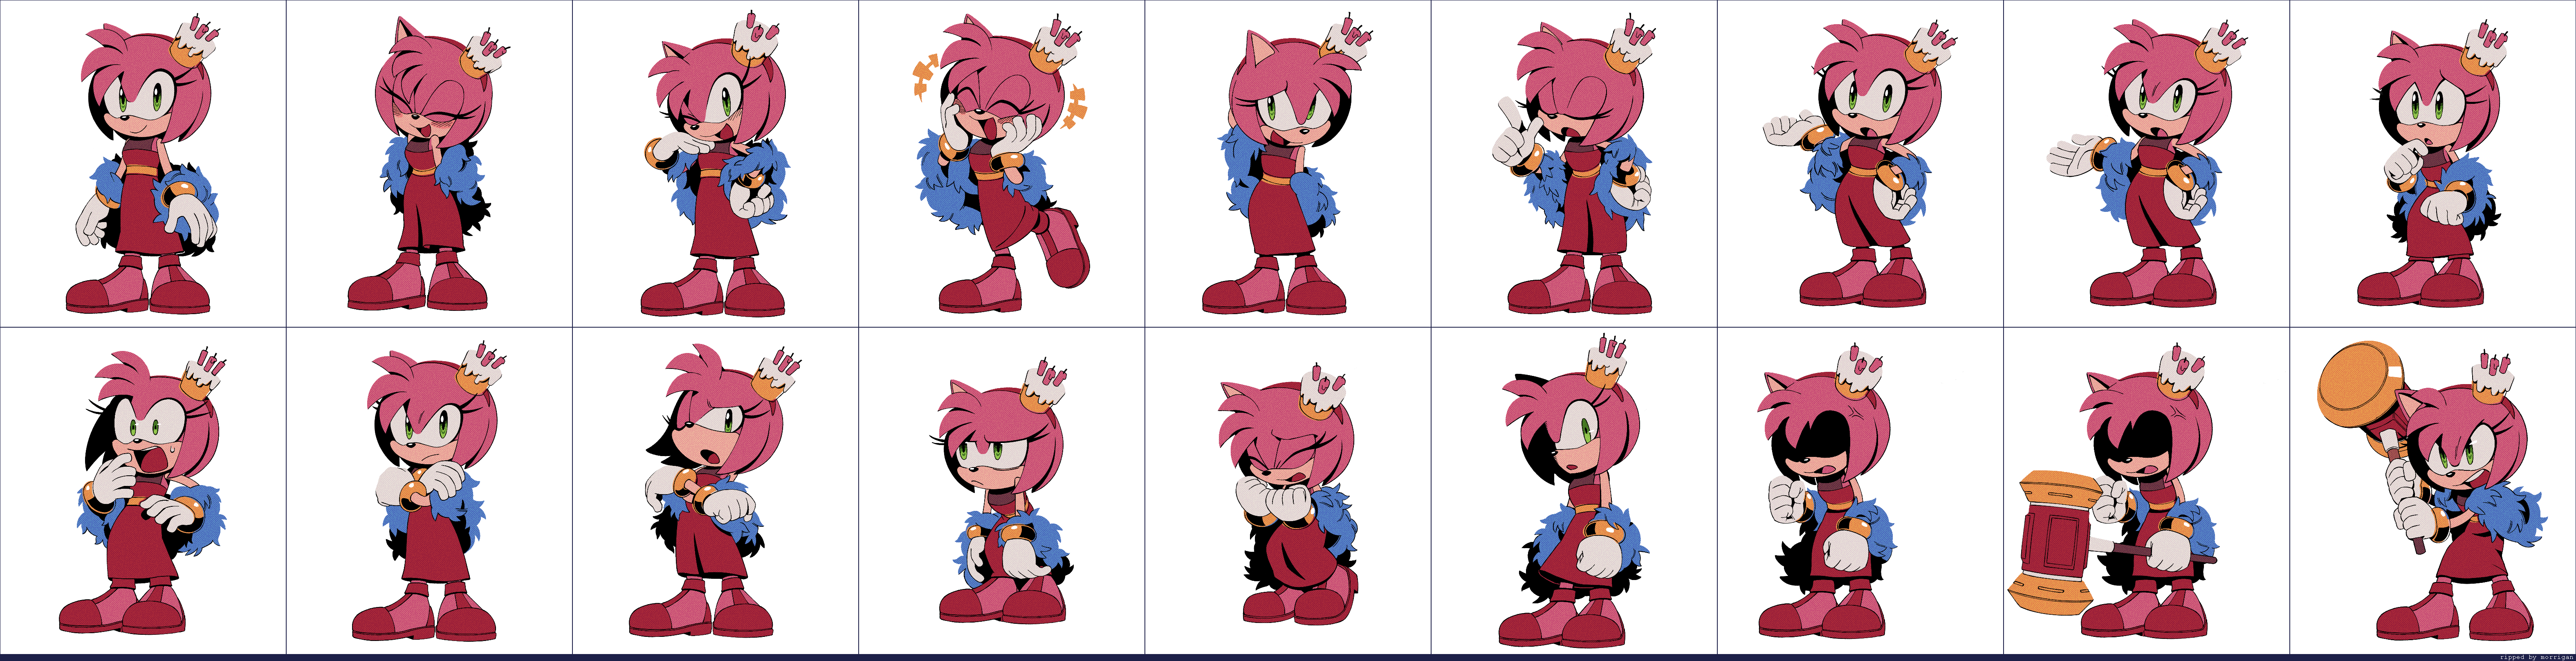 The Murder of Sonic the Hedgehog - Amy Rose